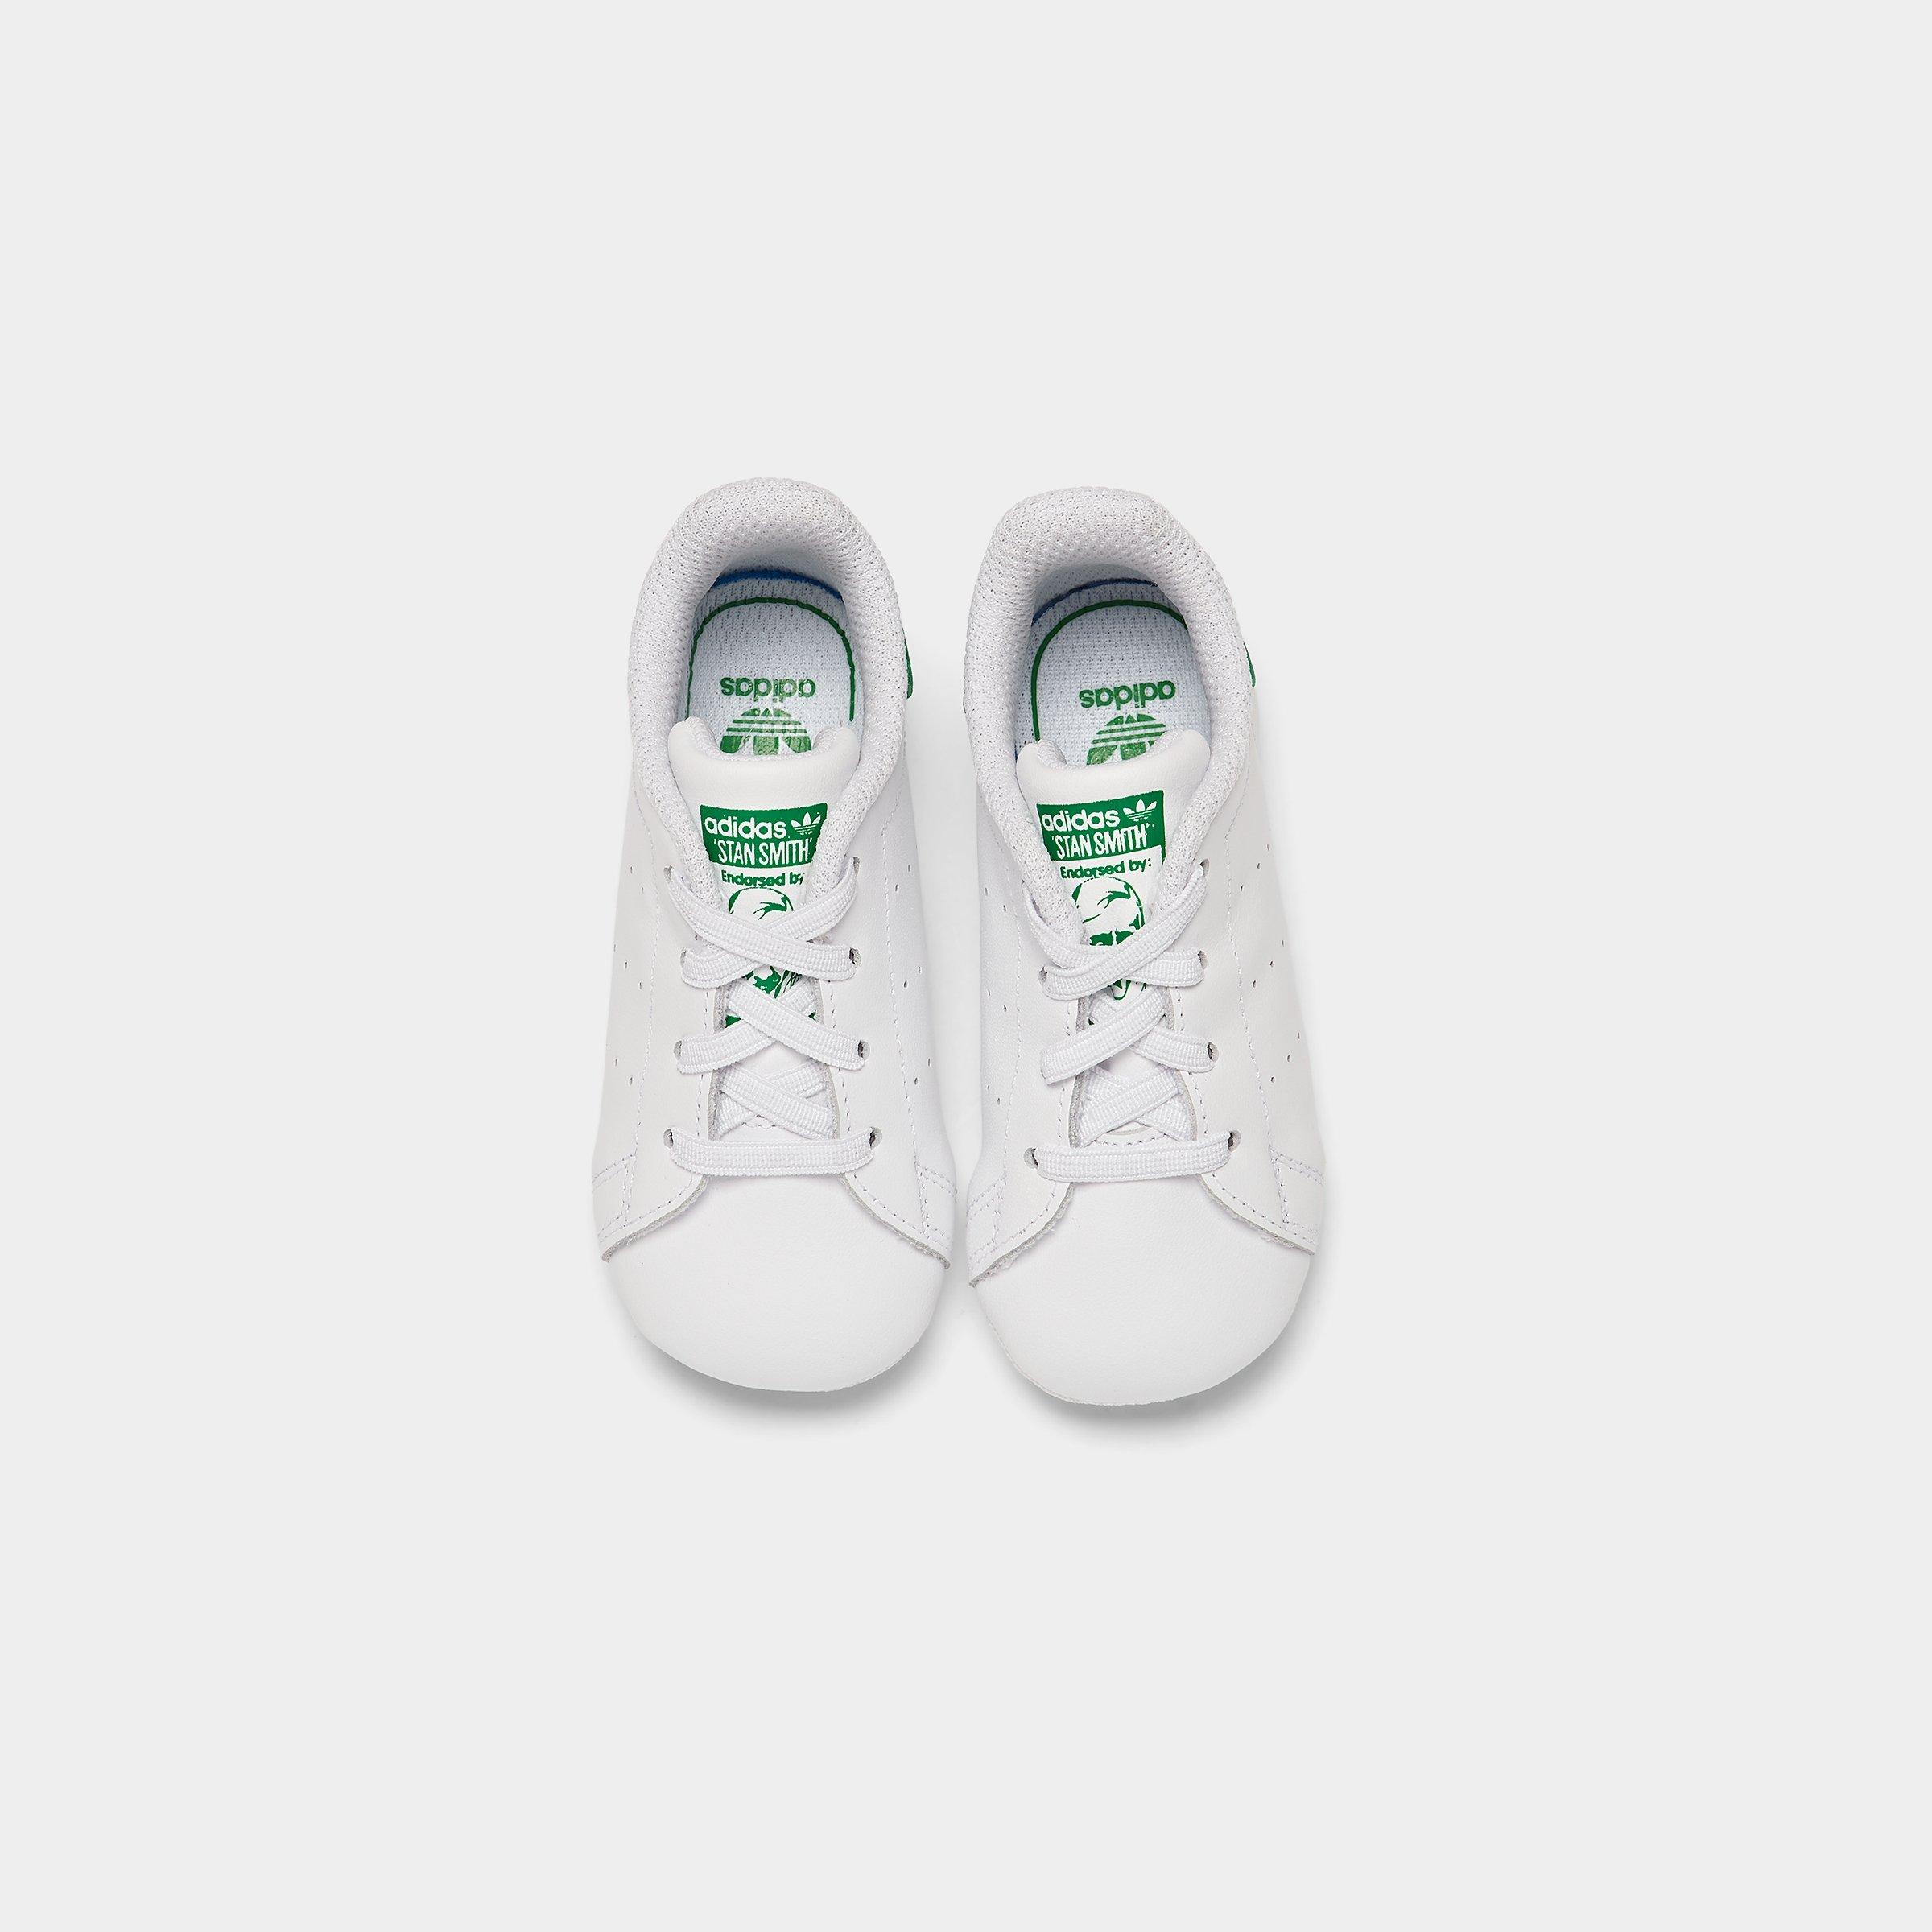 baby stan smith shoes